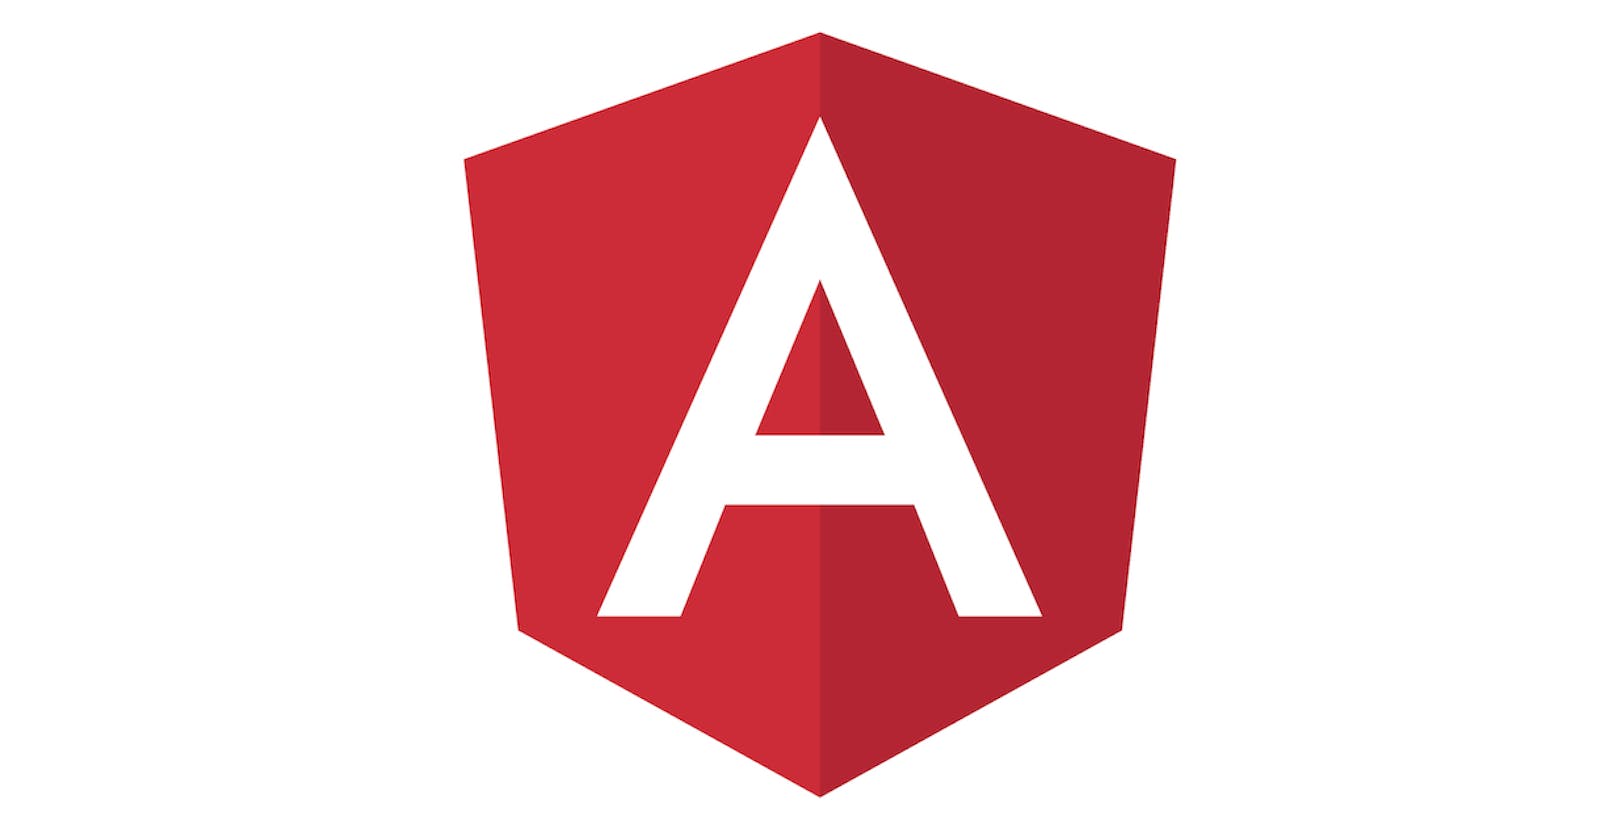 How To Deploy Angular App On Shared Hosting